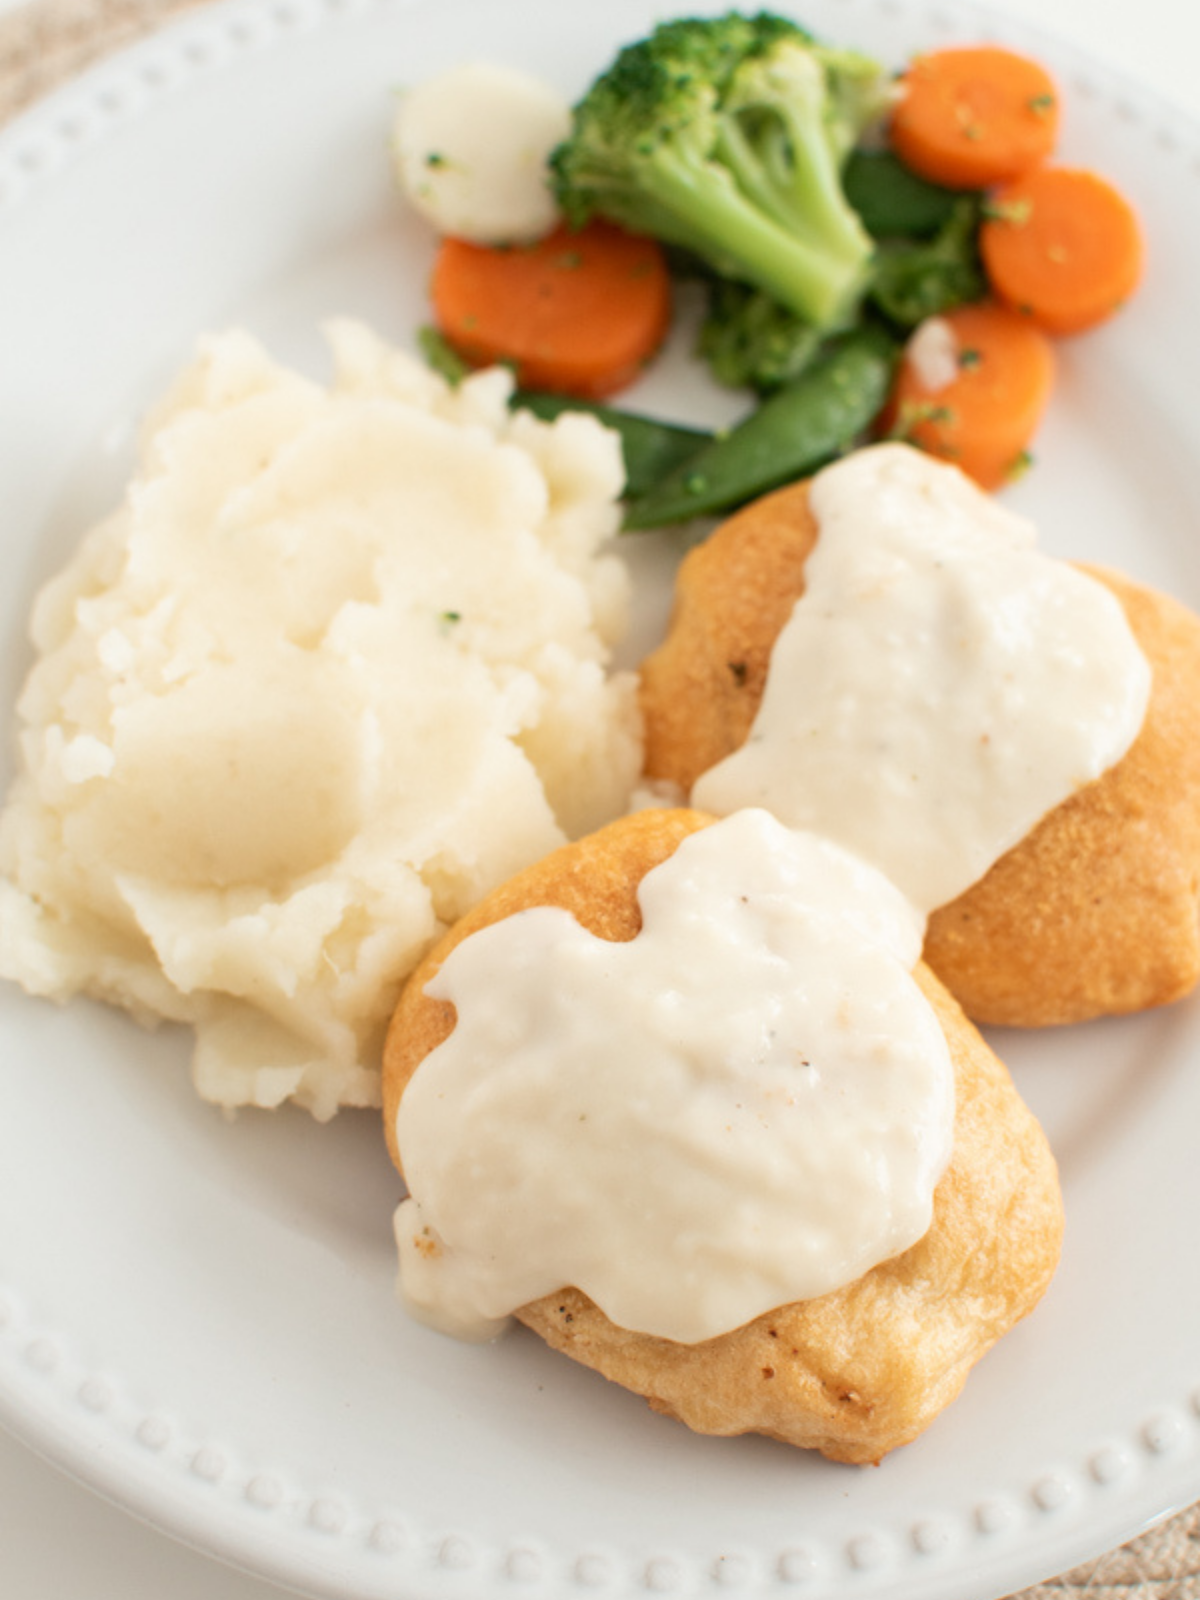 Chicken pillows with gravy on white dinner plate served with a vegetable medley.